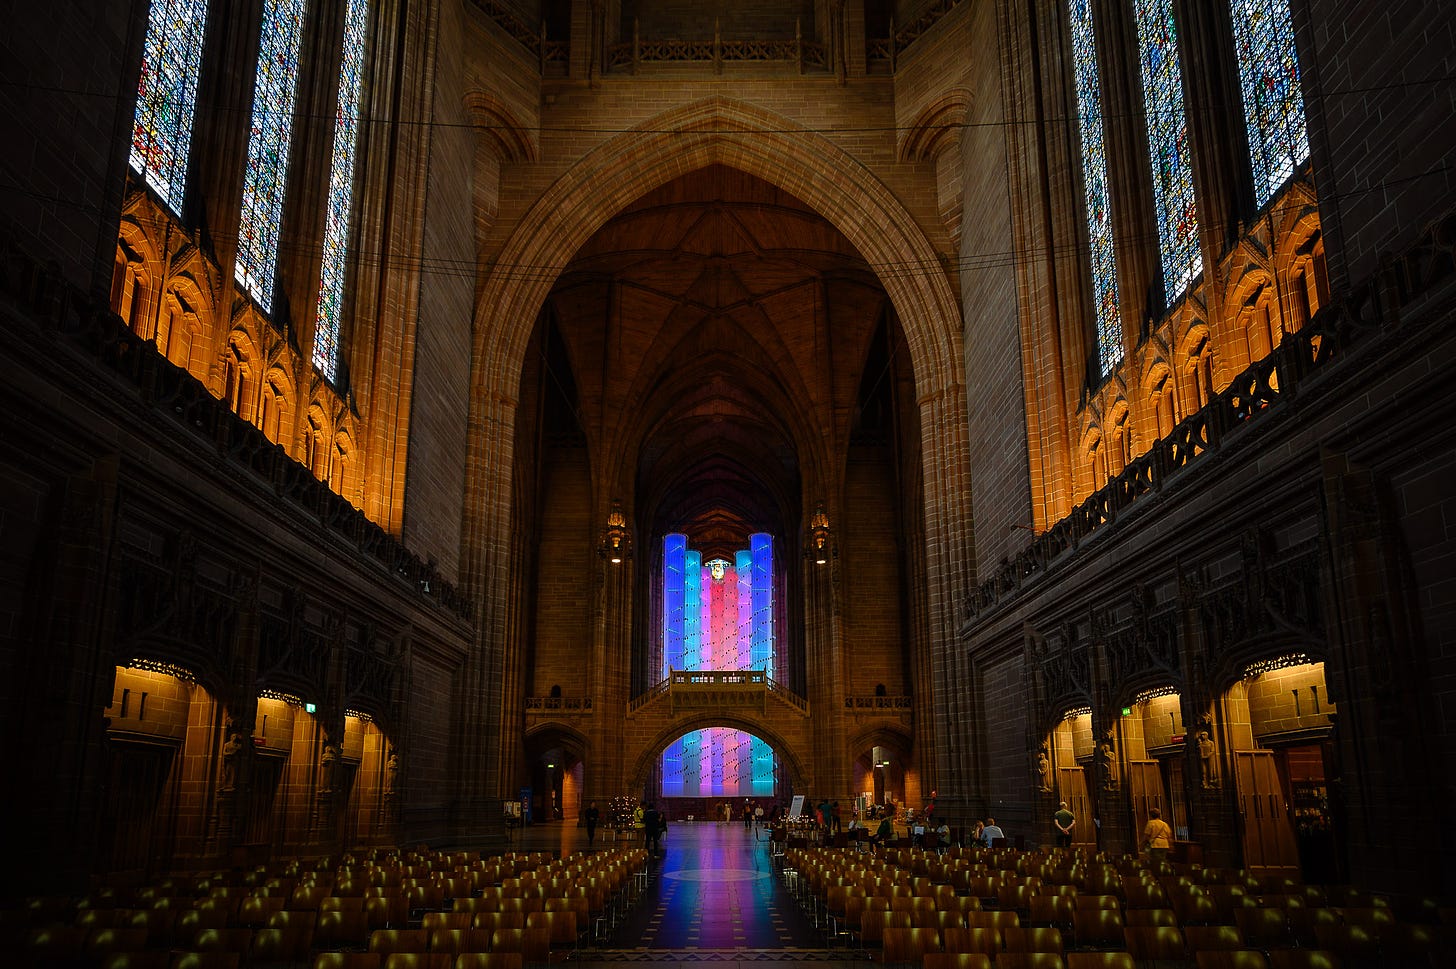 Inside a large cathedral space hangs columns of rainbow coloured light.